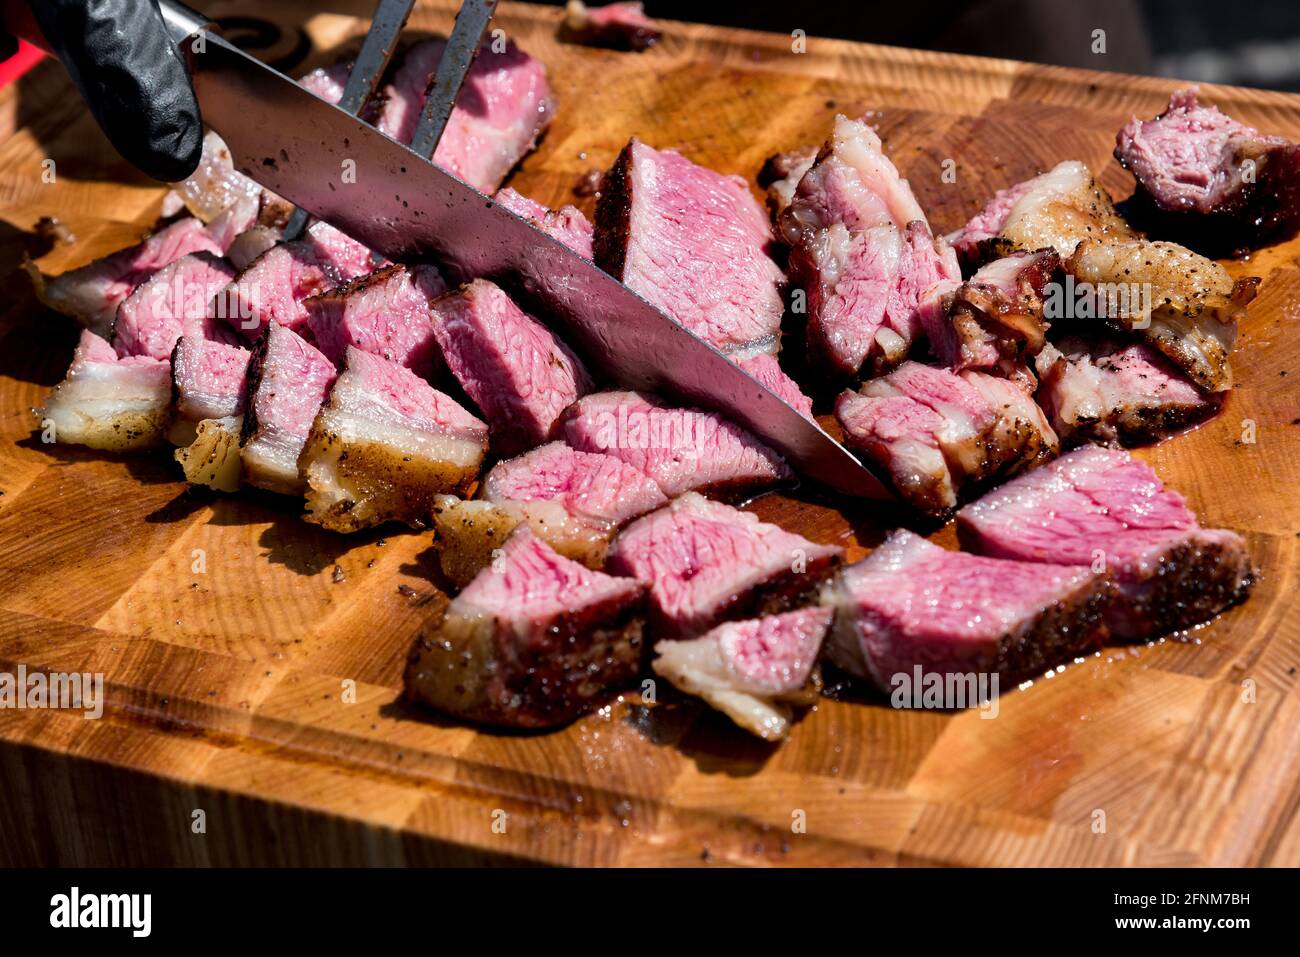 Chef slicing tender medium rare roast beef brisket with a large carving knife in a close up view on the chopping board Stock Photo